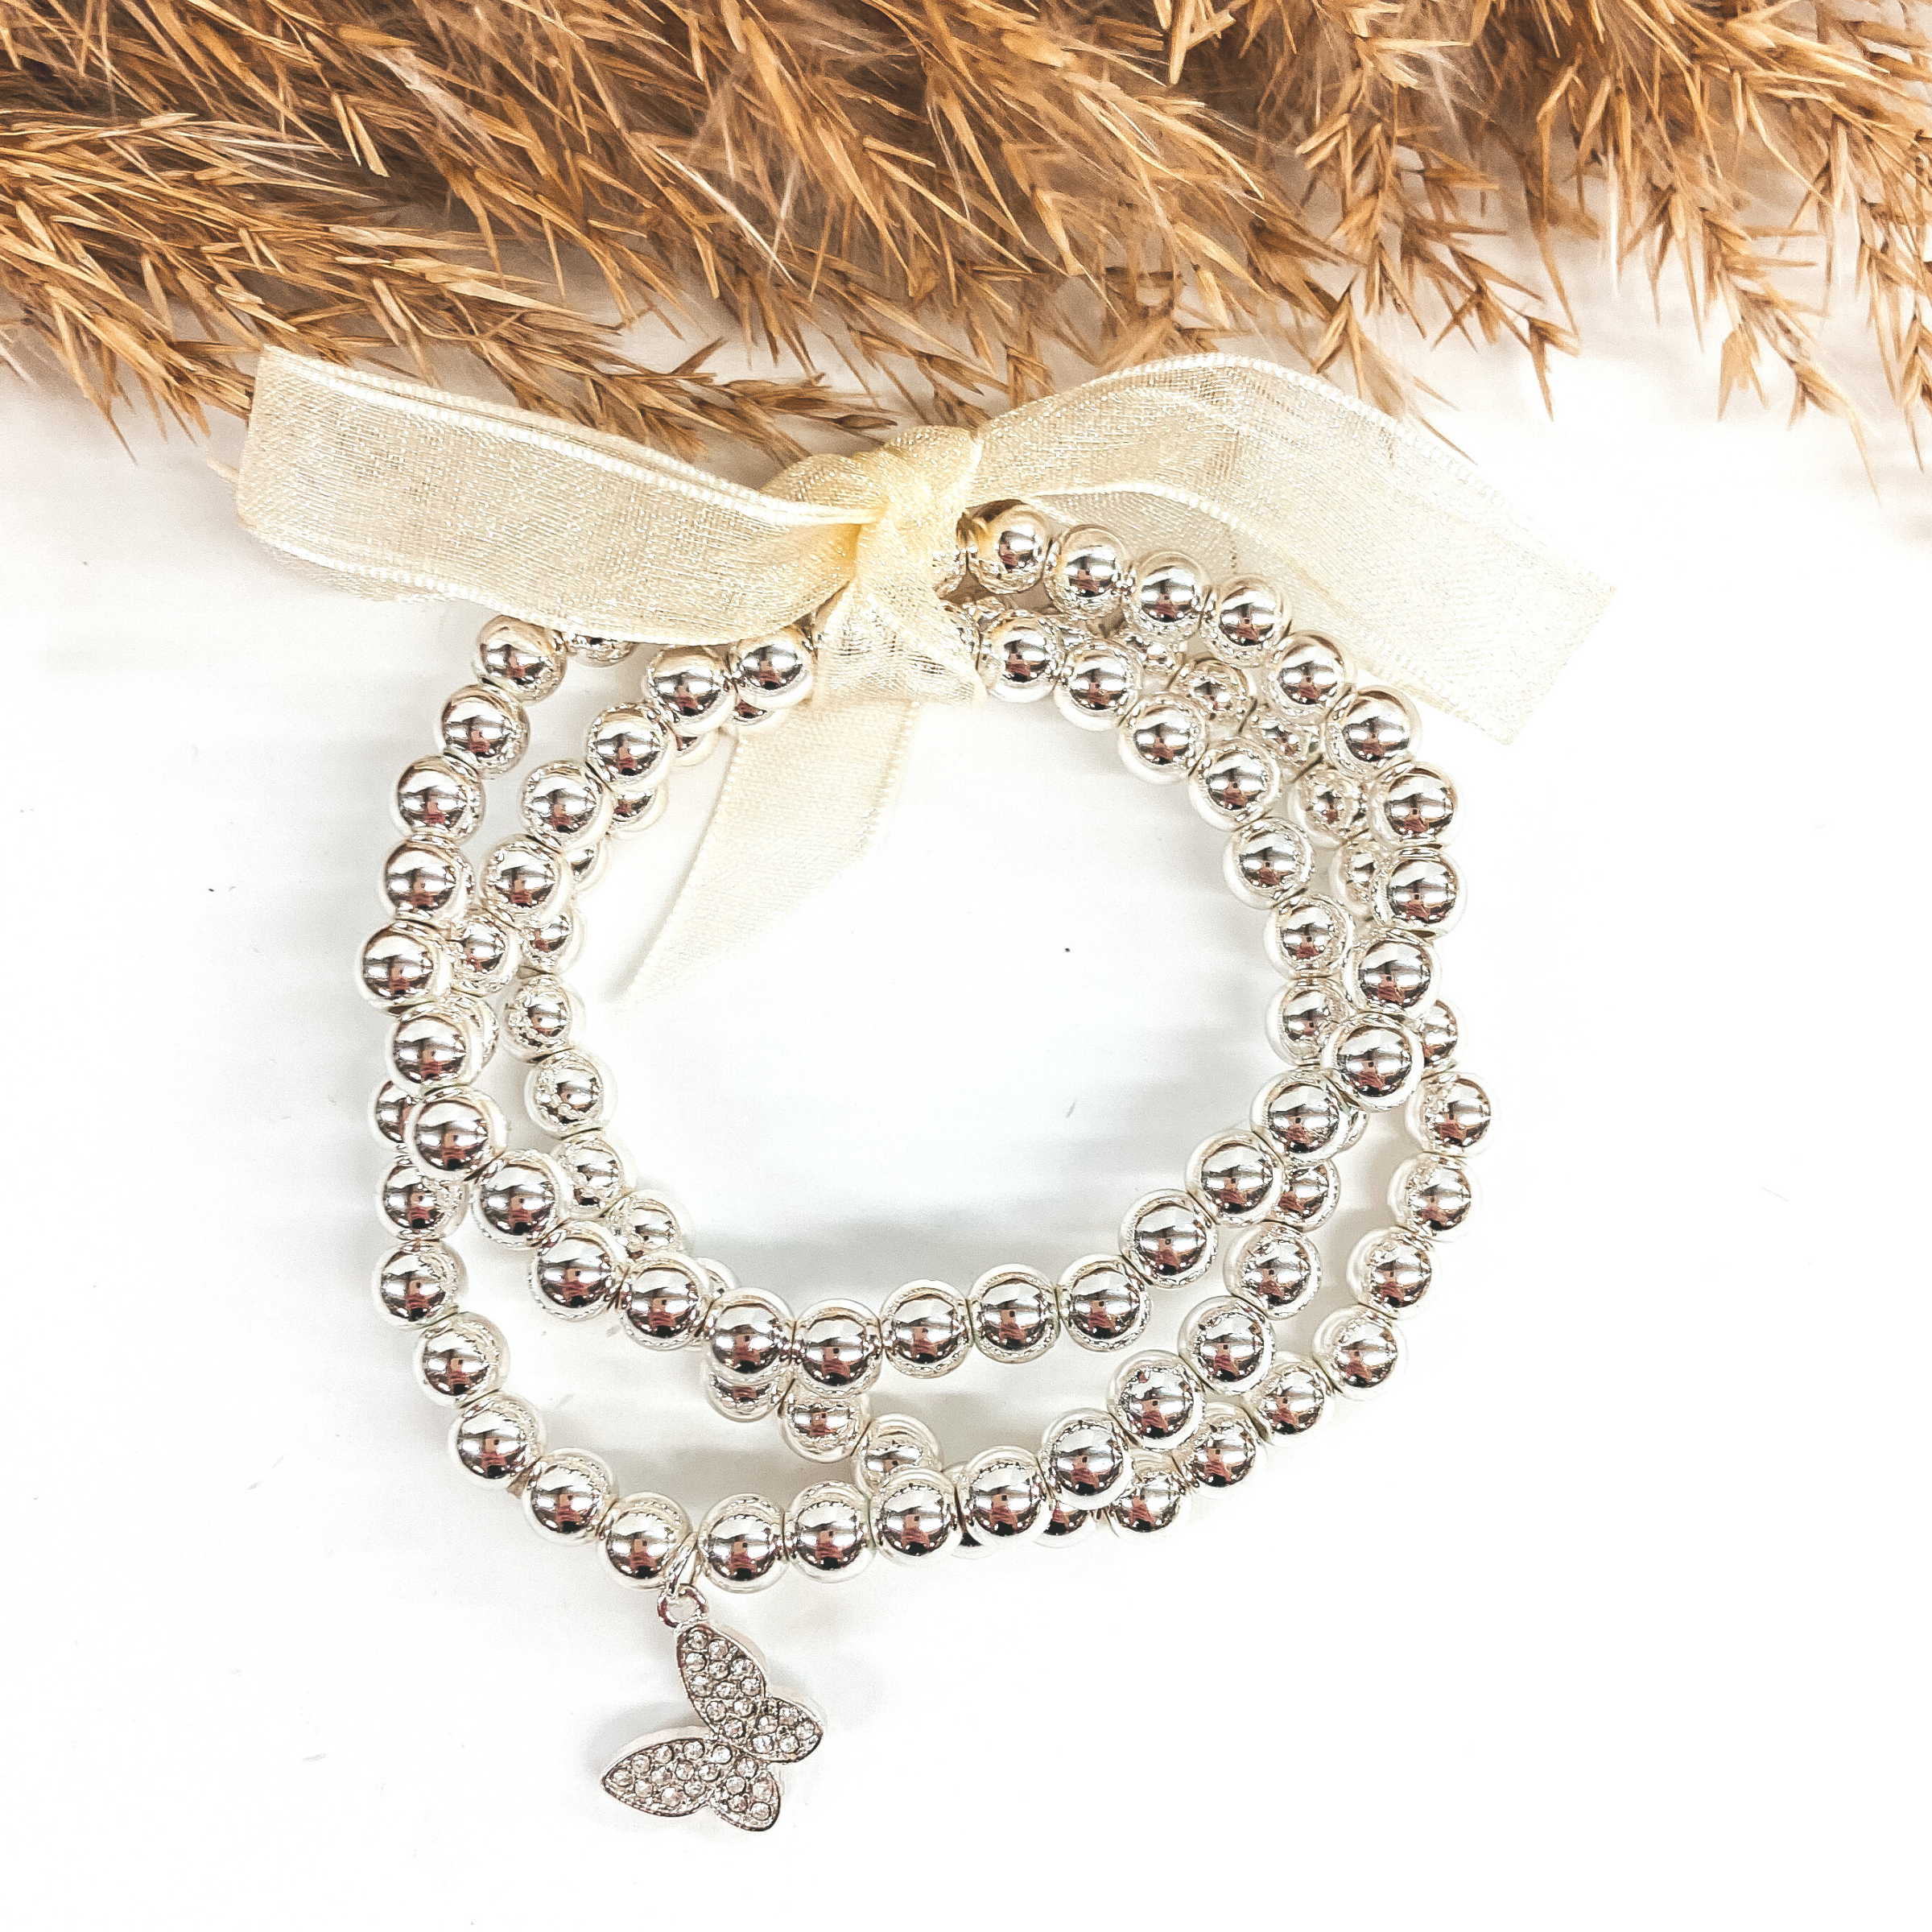 Three silver circle bracelets with a crystal butterfly charm. Pictured on a white background with pampus grass.